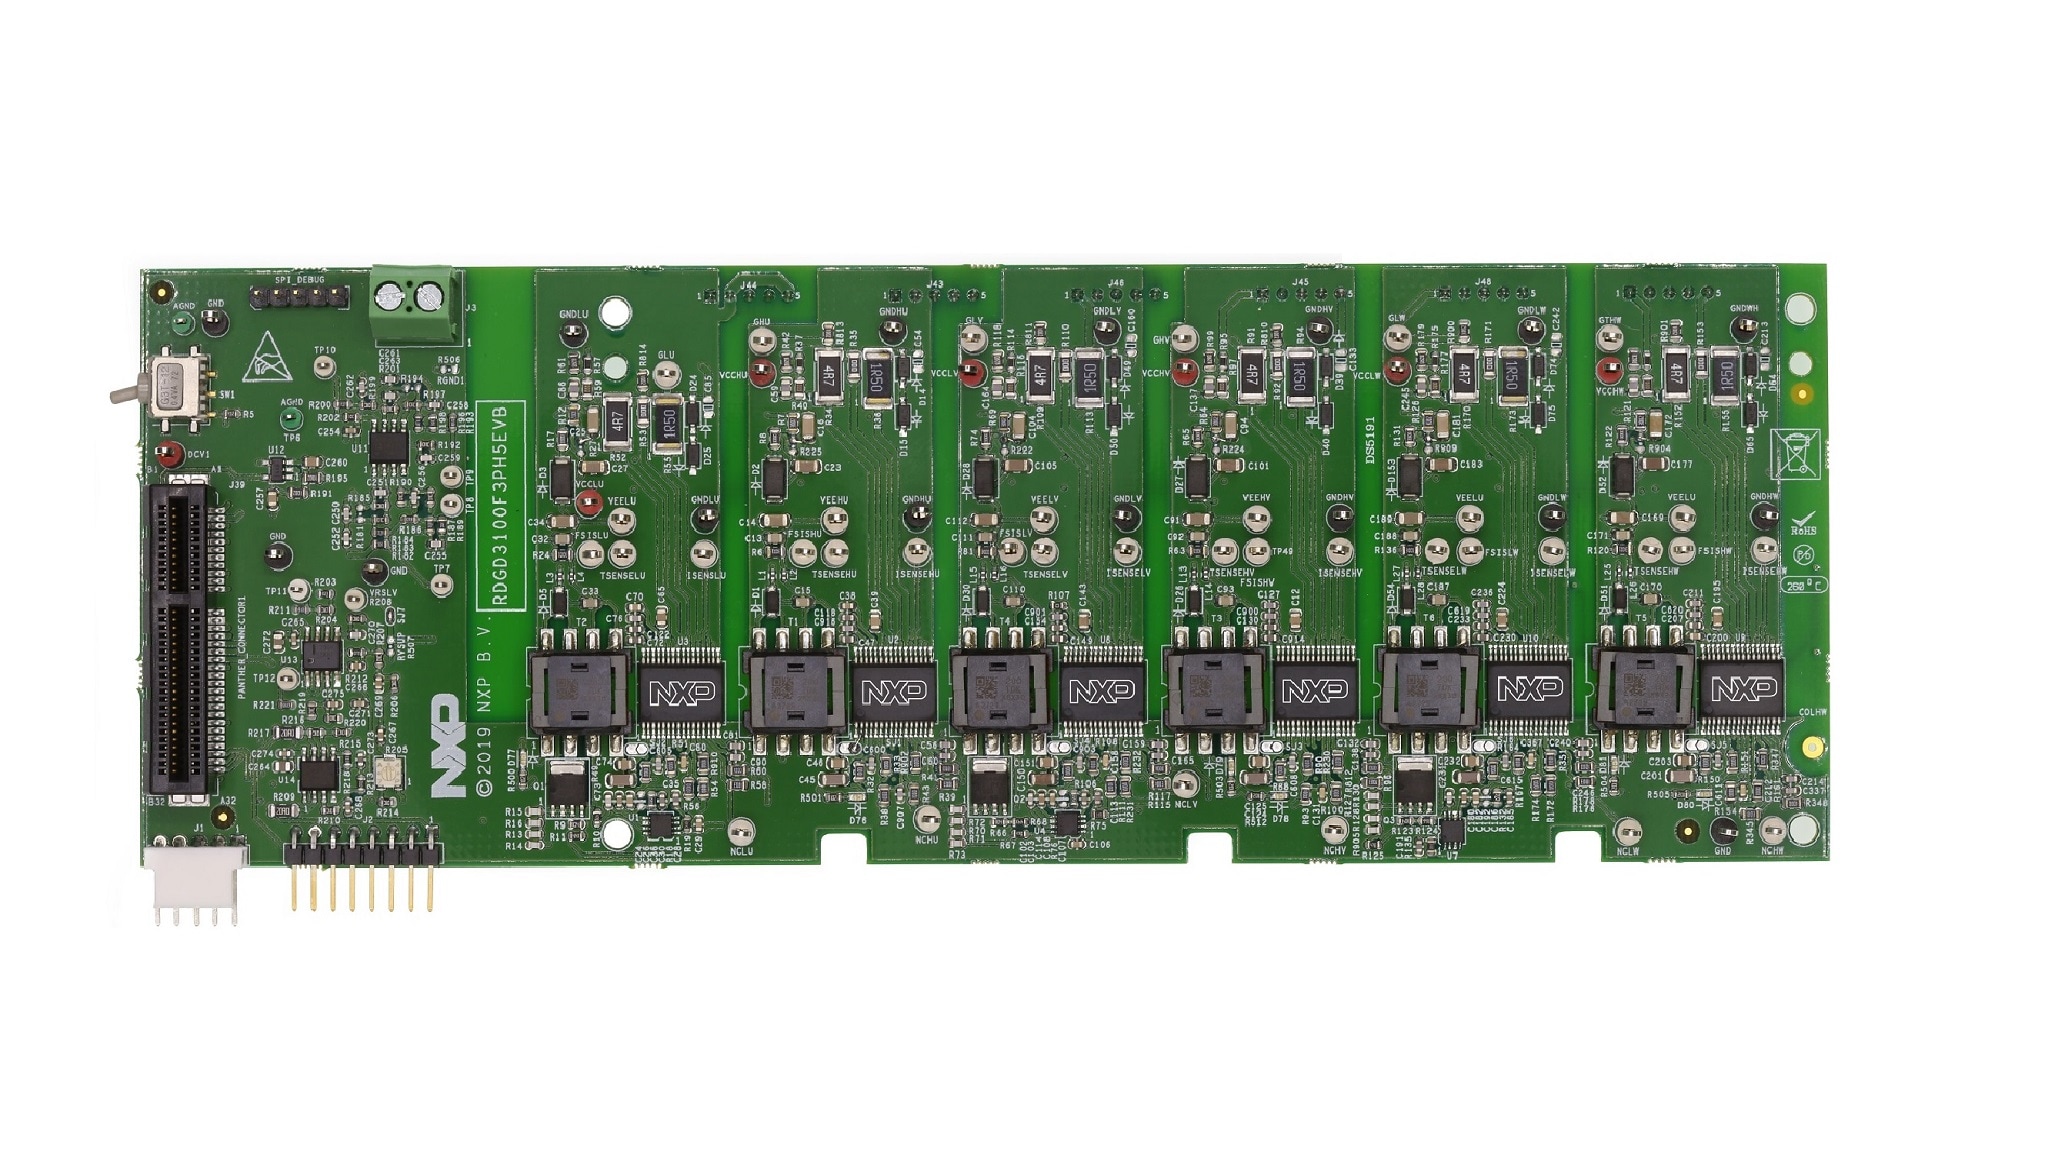 3-Phase Reference Design for Fuji M653 IGBTs